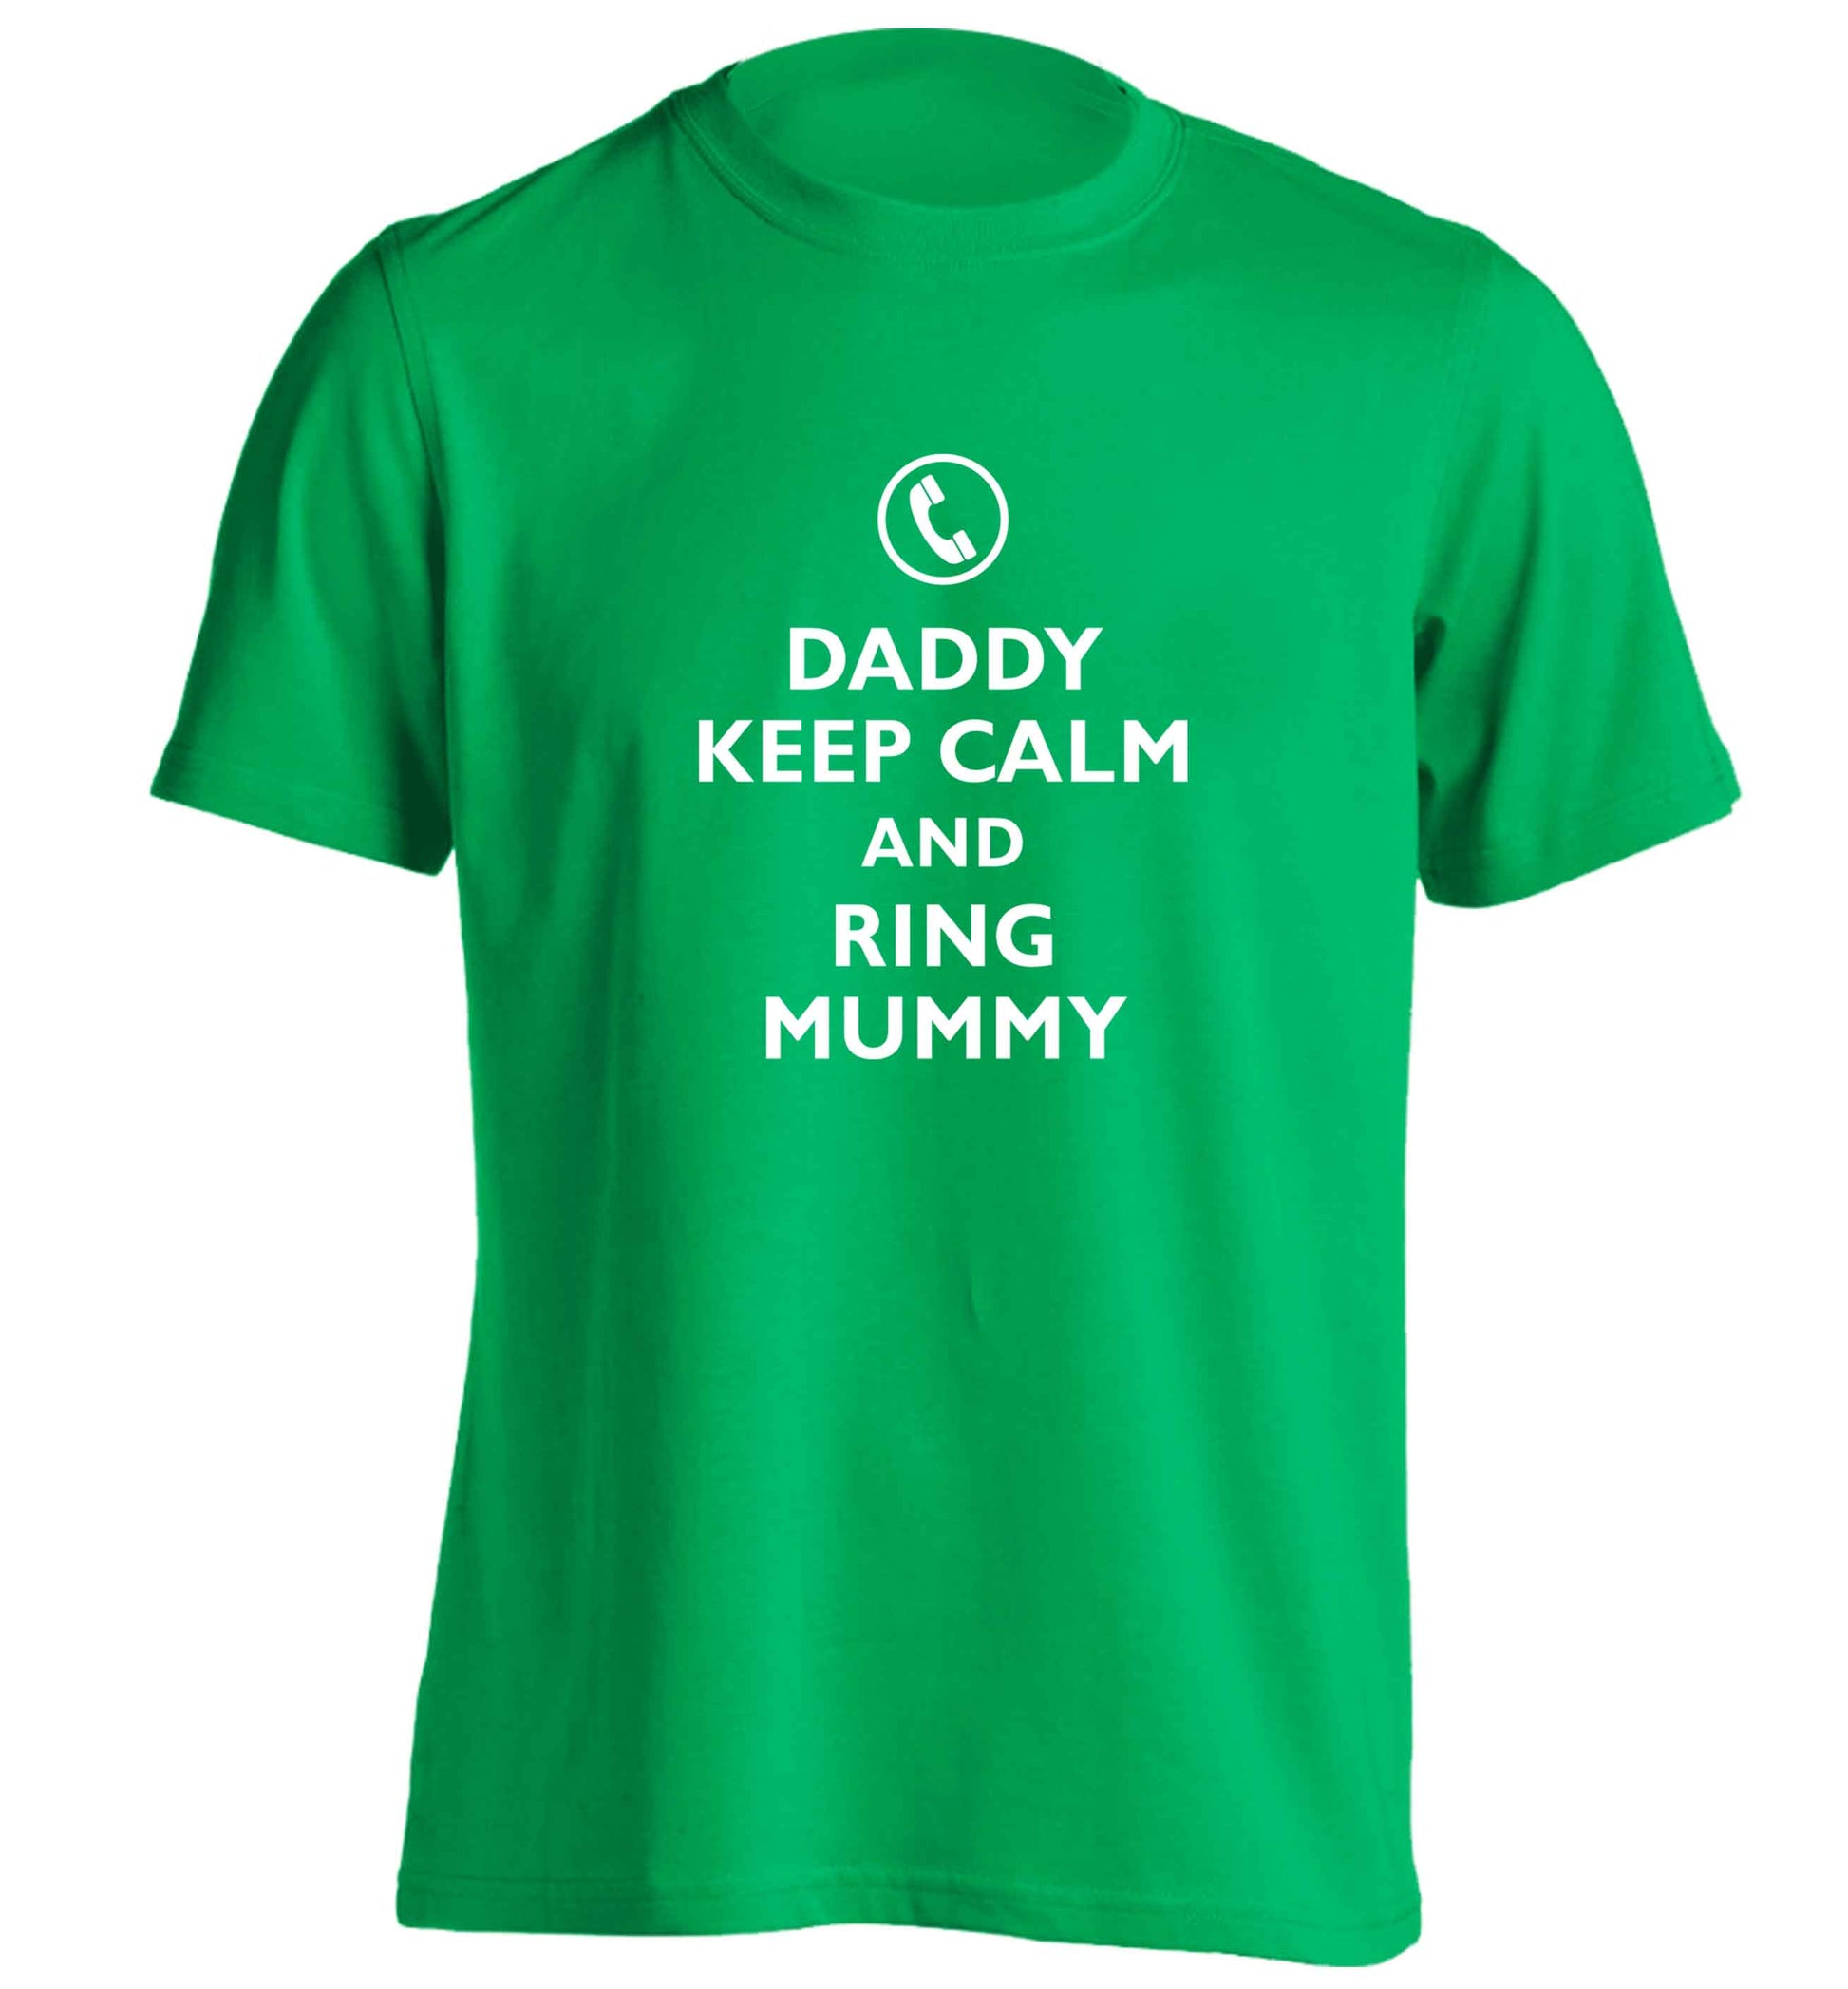 Daddy keep calm and ring mummy adults unisex green Tshirt small